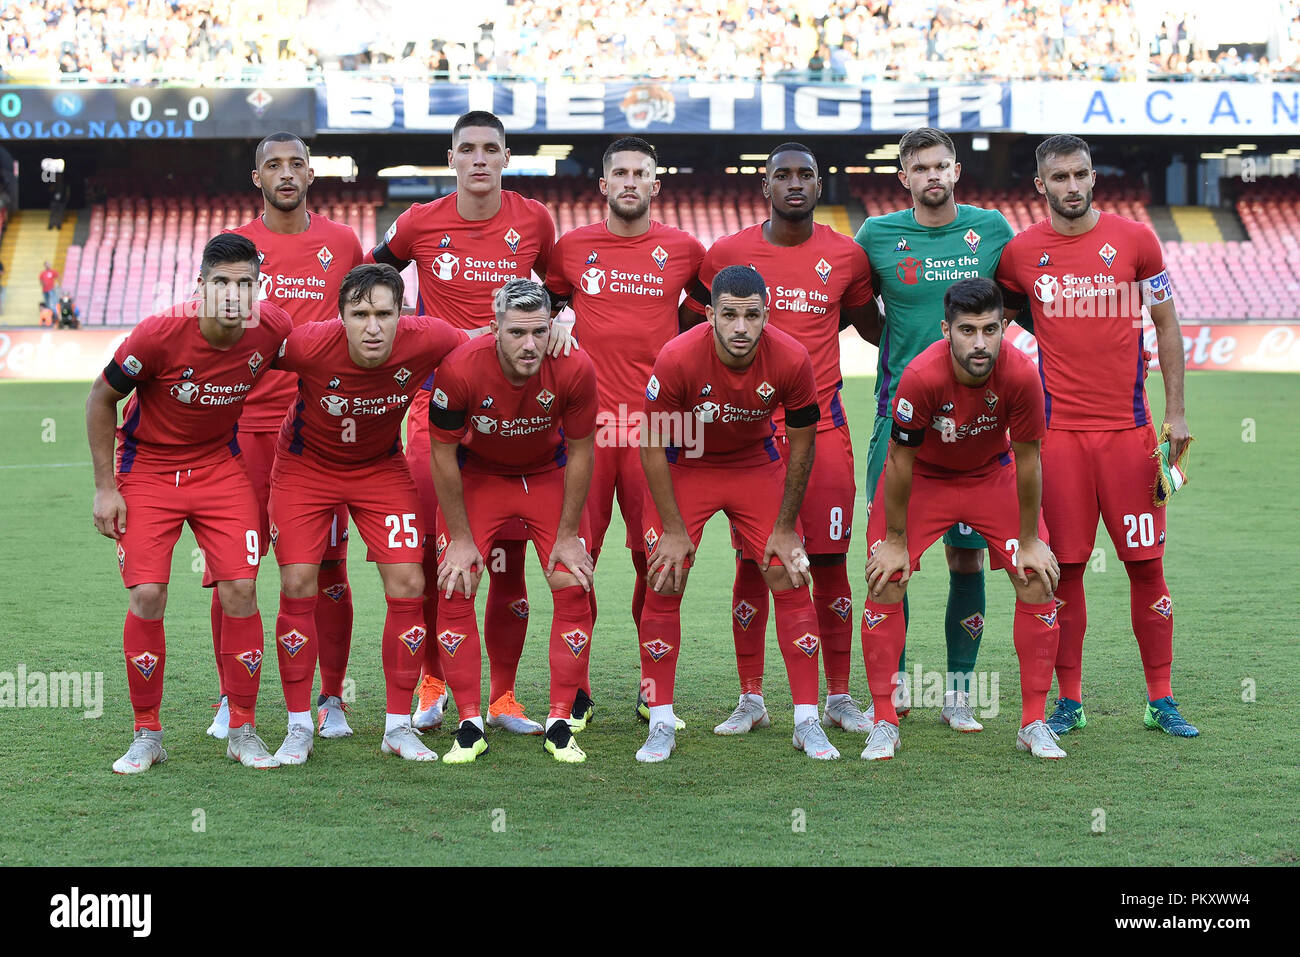 Napoli, Italy. 15th September 2018.  Fiorentina team pose for a photograph before the Serie A TIM match between SSC Napoli Vs Fiorentina at  San Paolo Stadium on september 15, 2018 in Naples Italy. (Photo by Marco Iorio) Credit: marco iorio/Alamy Live News Stock Photo